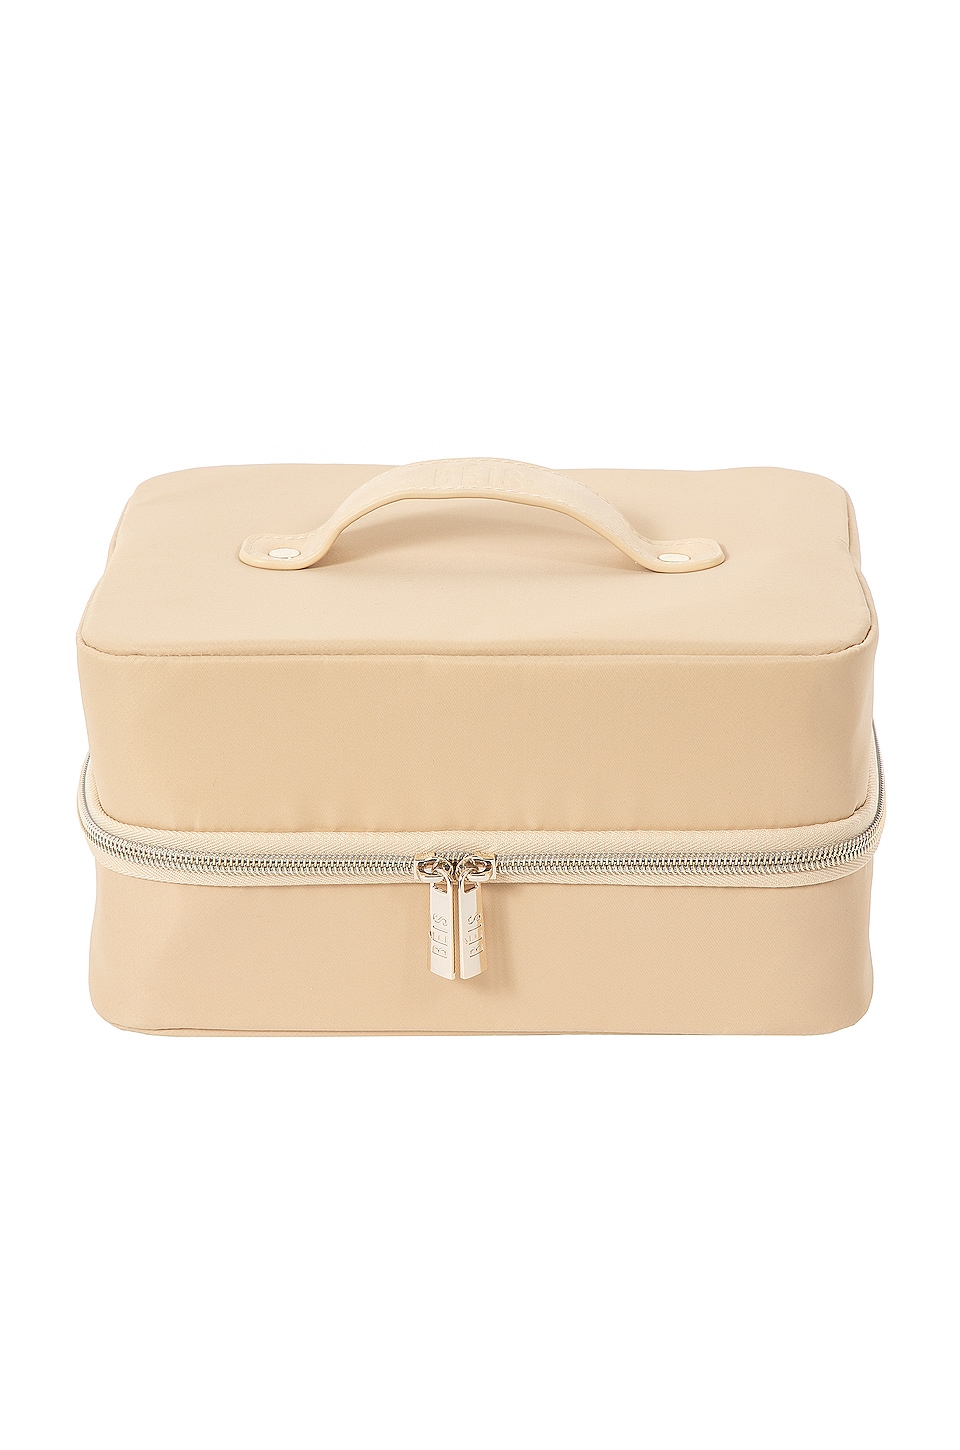 BEIS The Hanging Cosmetic Case in Beige | REVOLVE